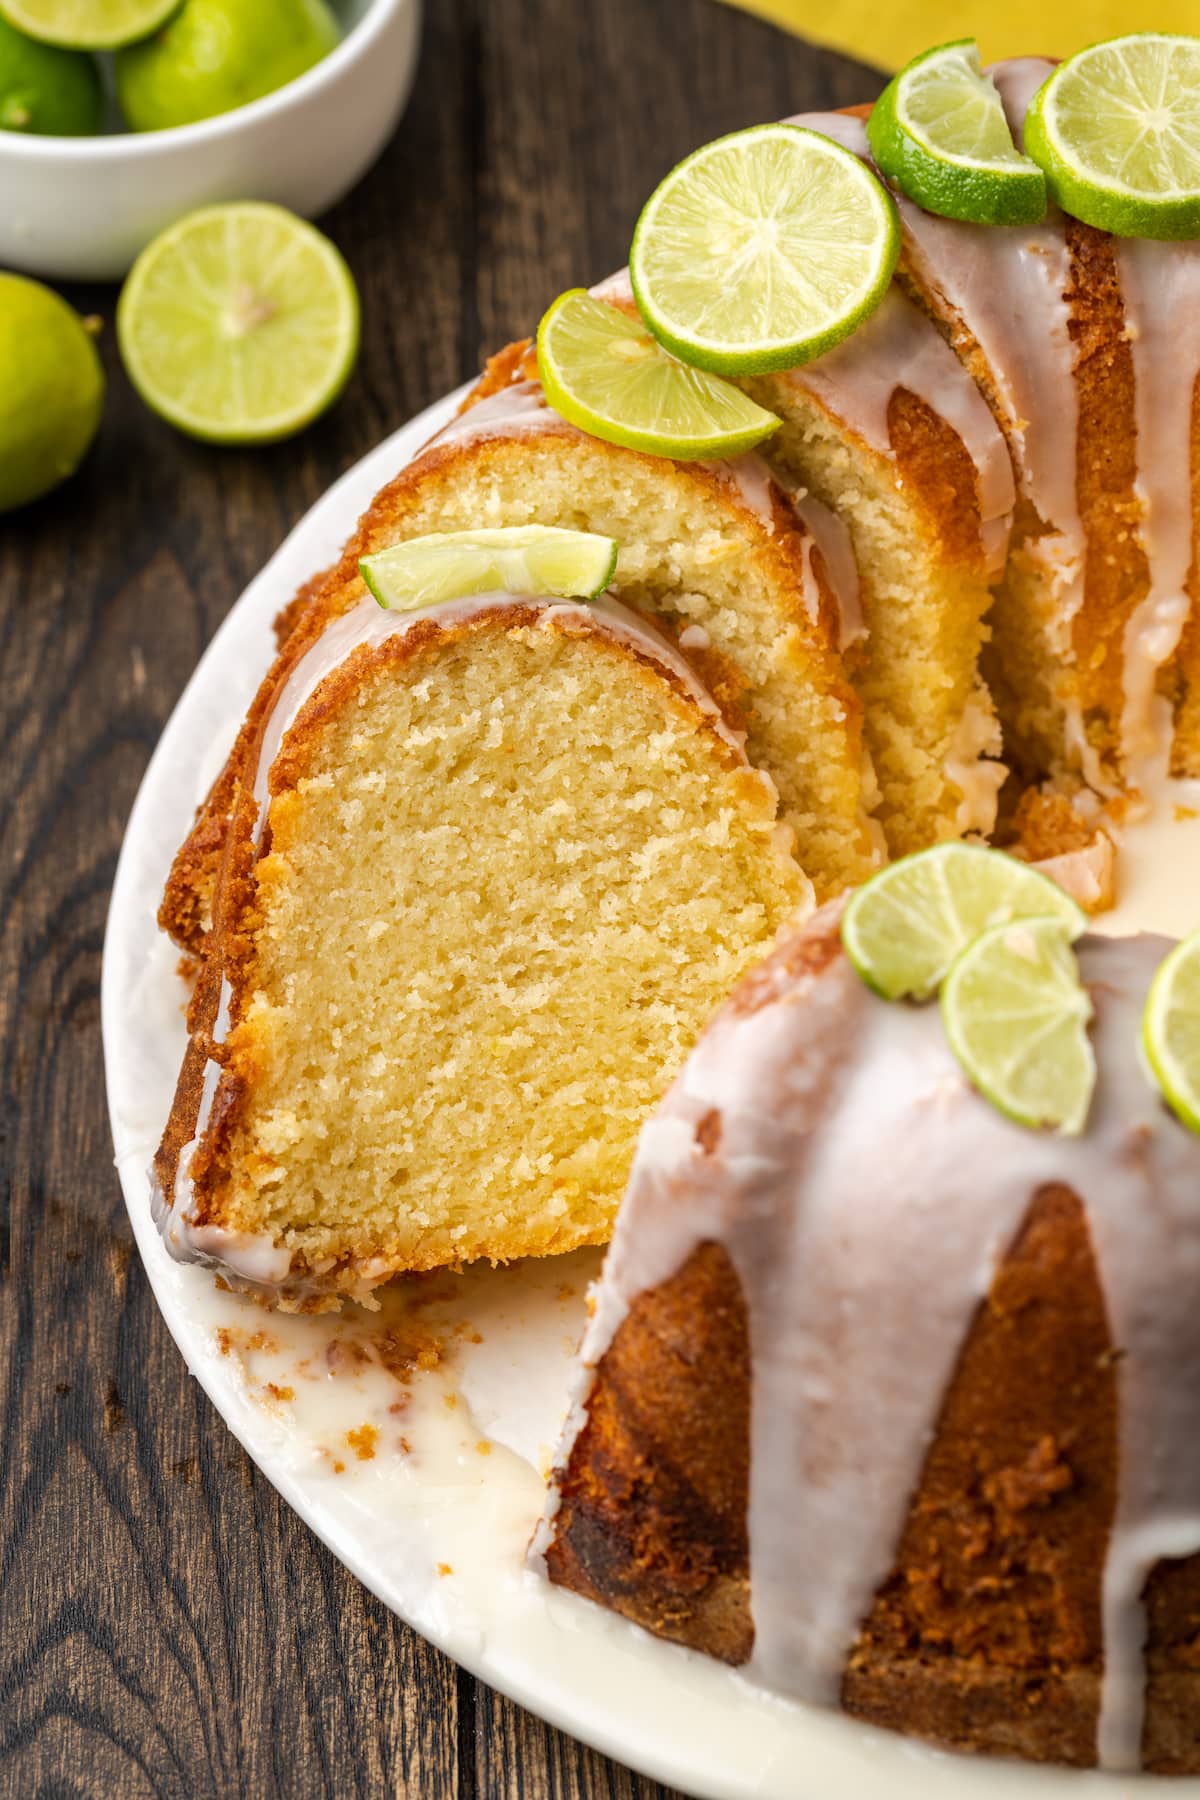 Key lime pound cake cut into slices, garnished with fresh limes.